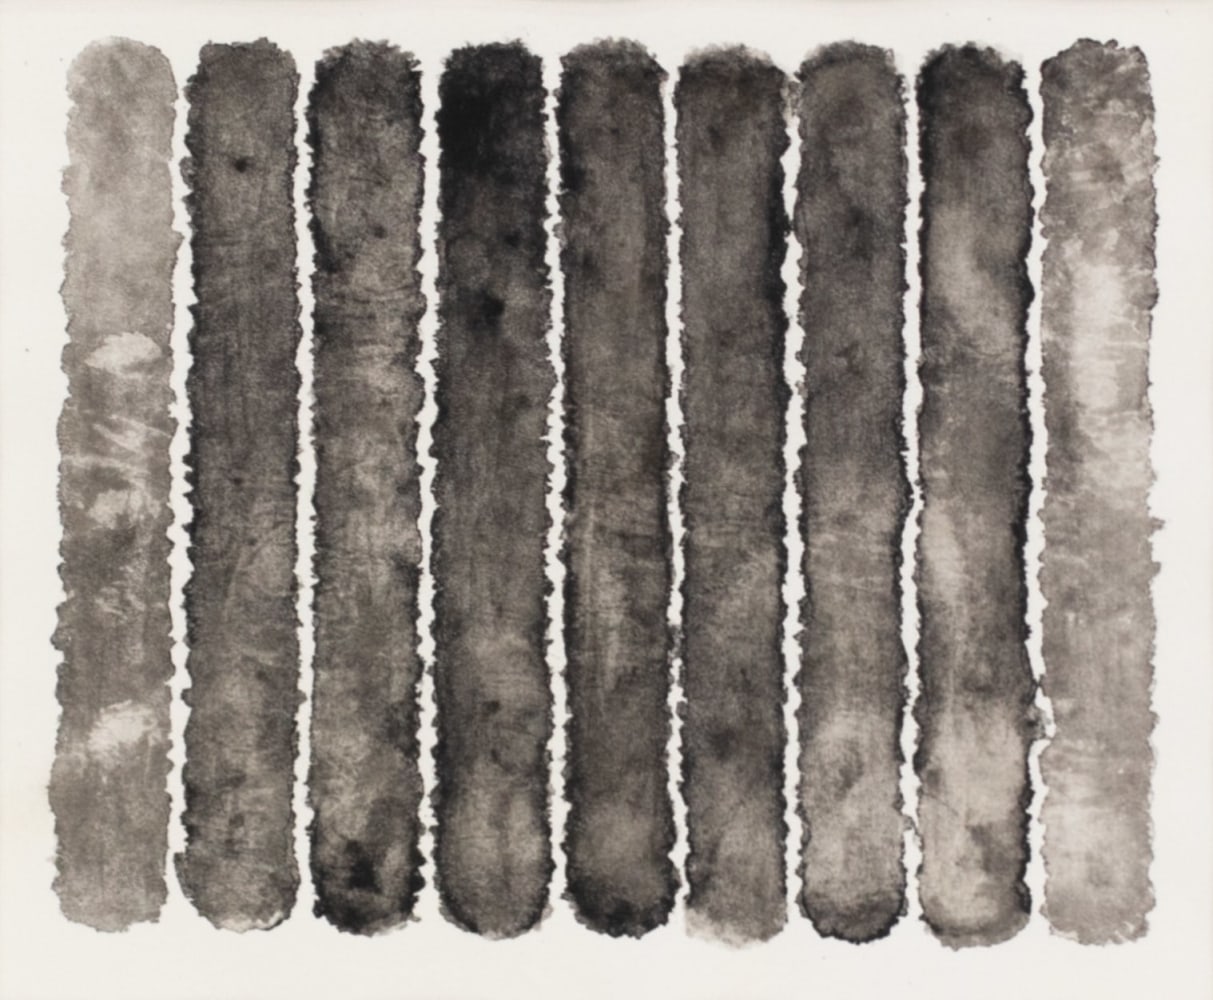 J. Steven Manolis, Molecules (Black &amp; White), 2008, watercolor, 18 x 20 inches, Black and White Abstract painting, Abstract expressionism art for sale at Manolis Projects Art Gallery, Miami, Fl